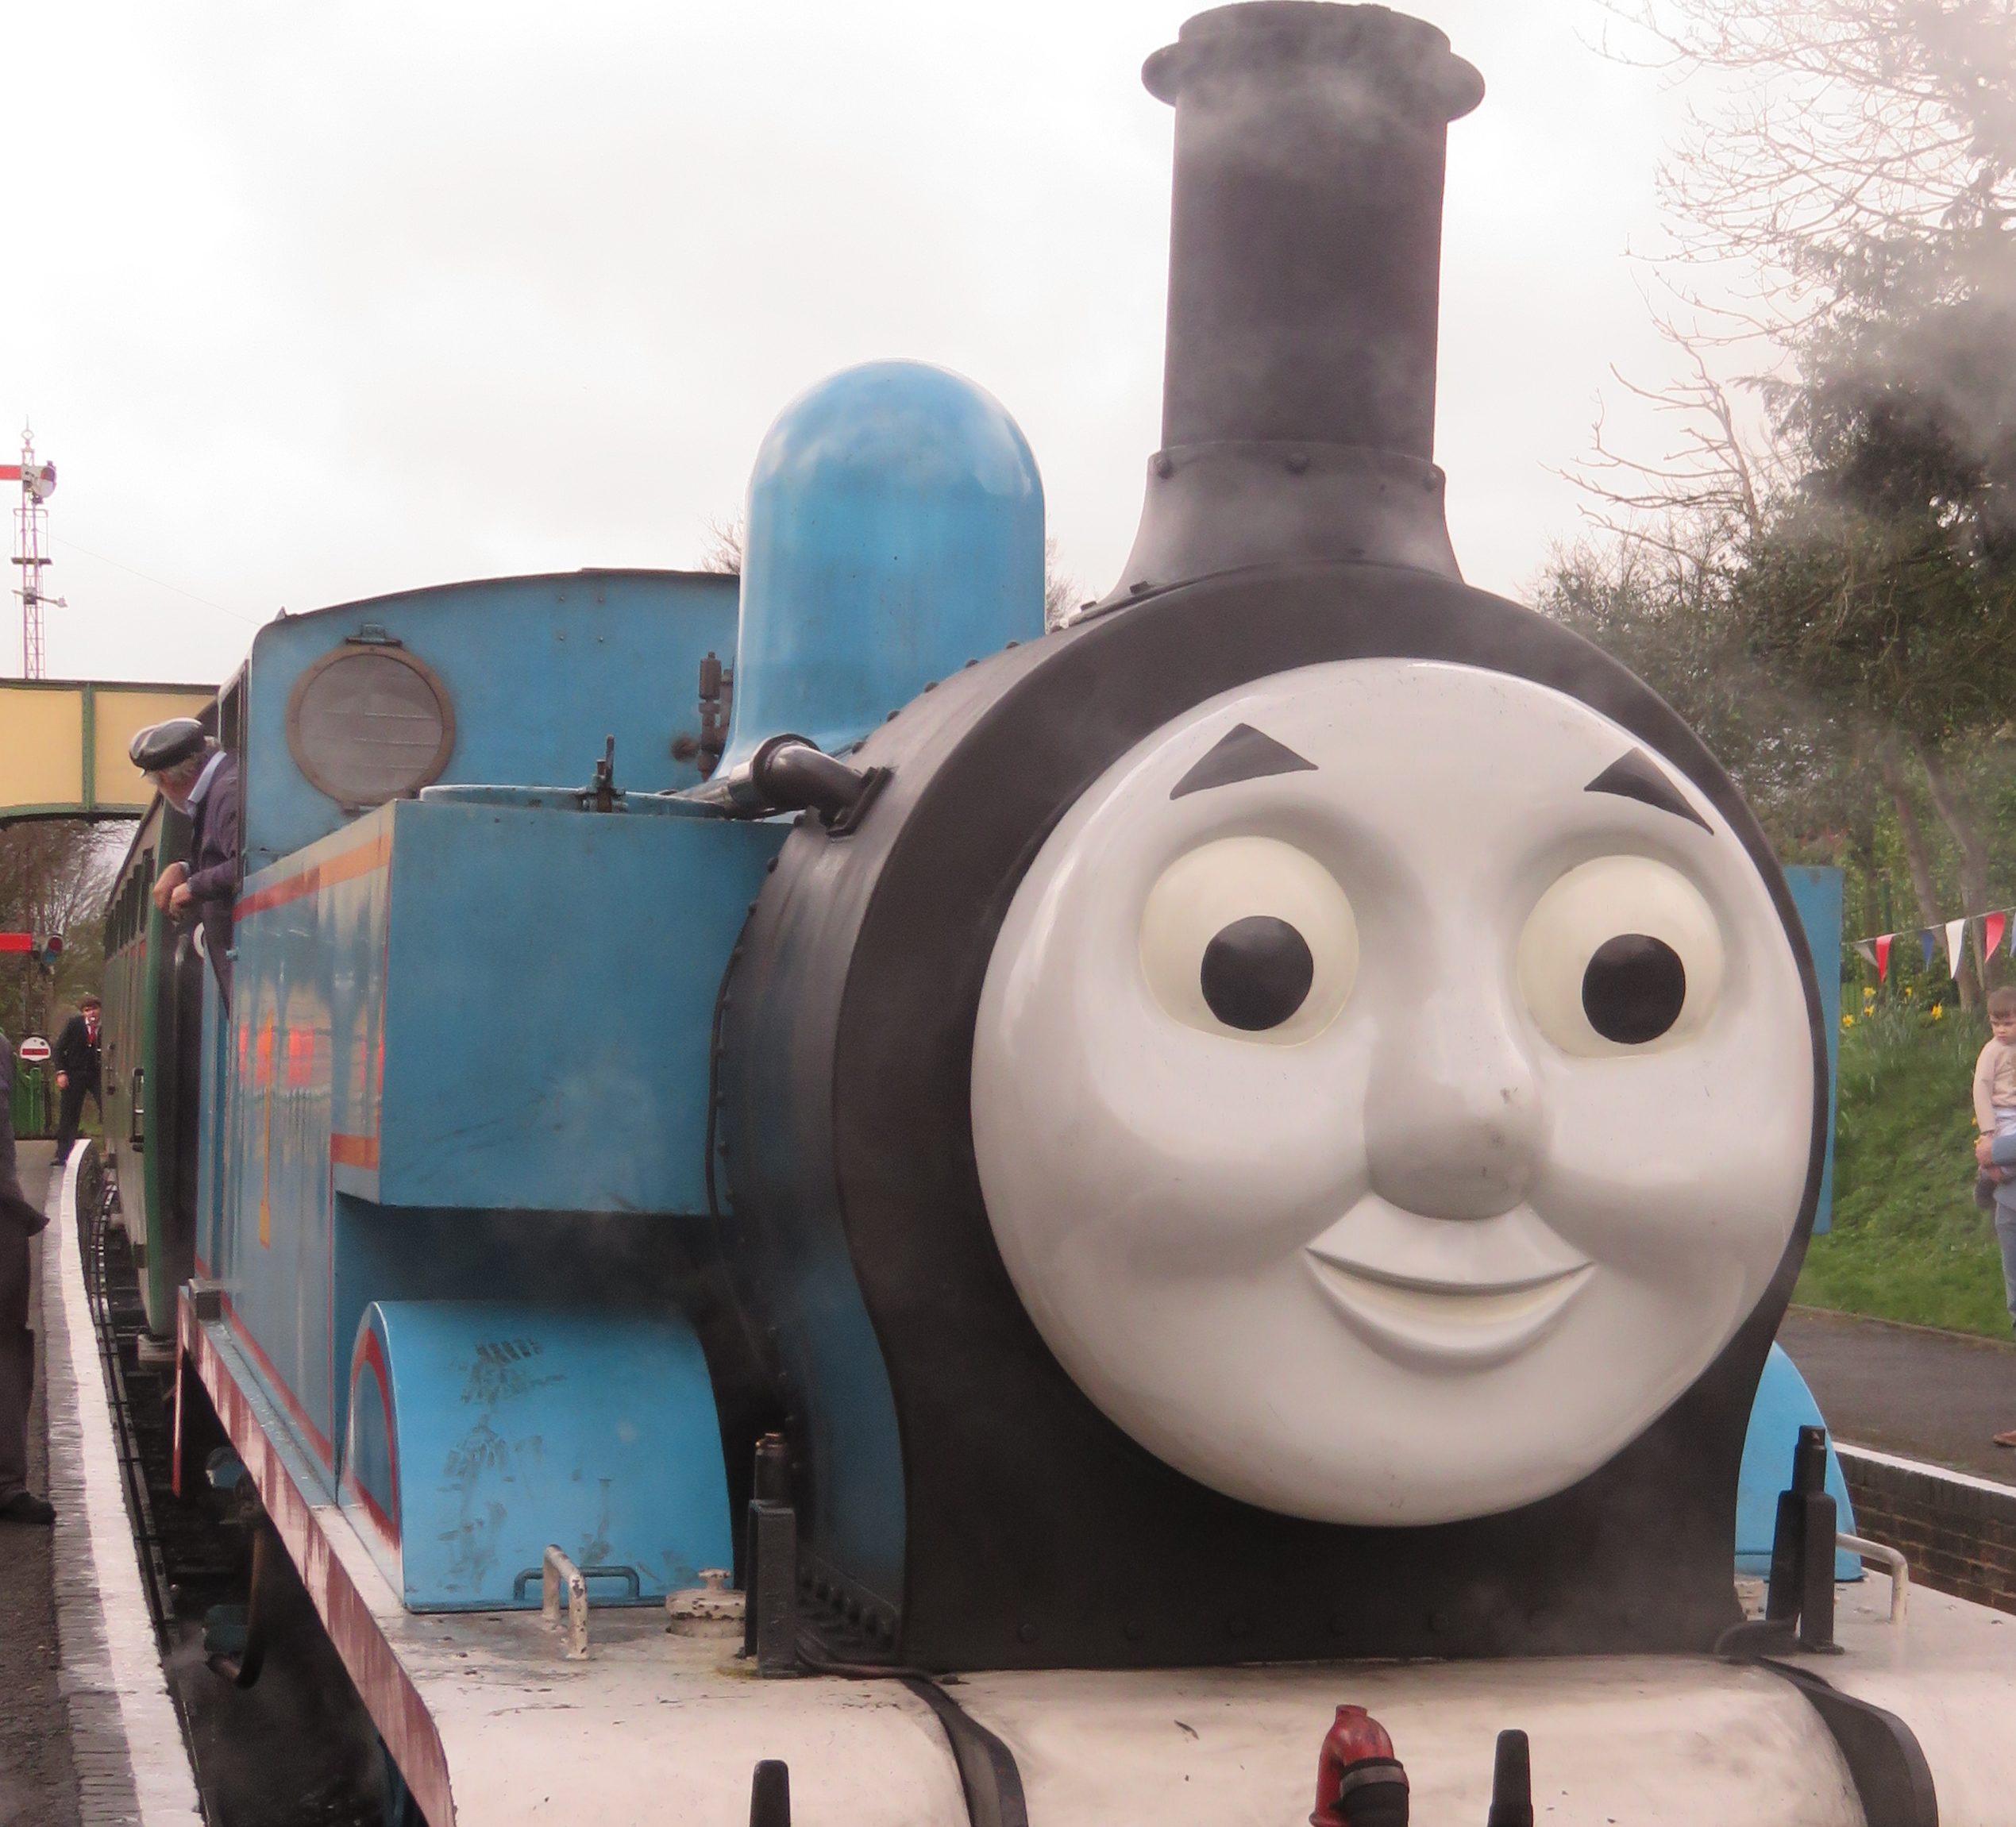 day out with Thomas the tank engine